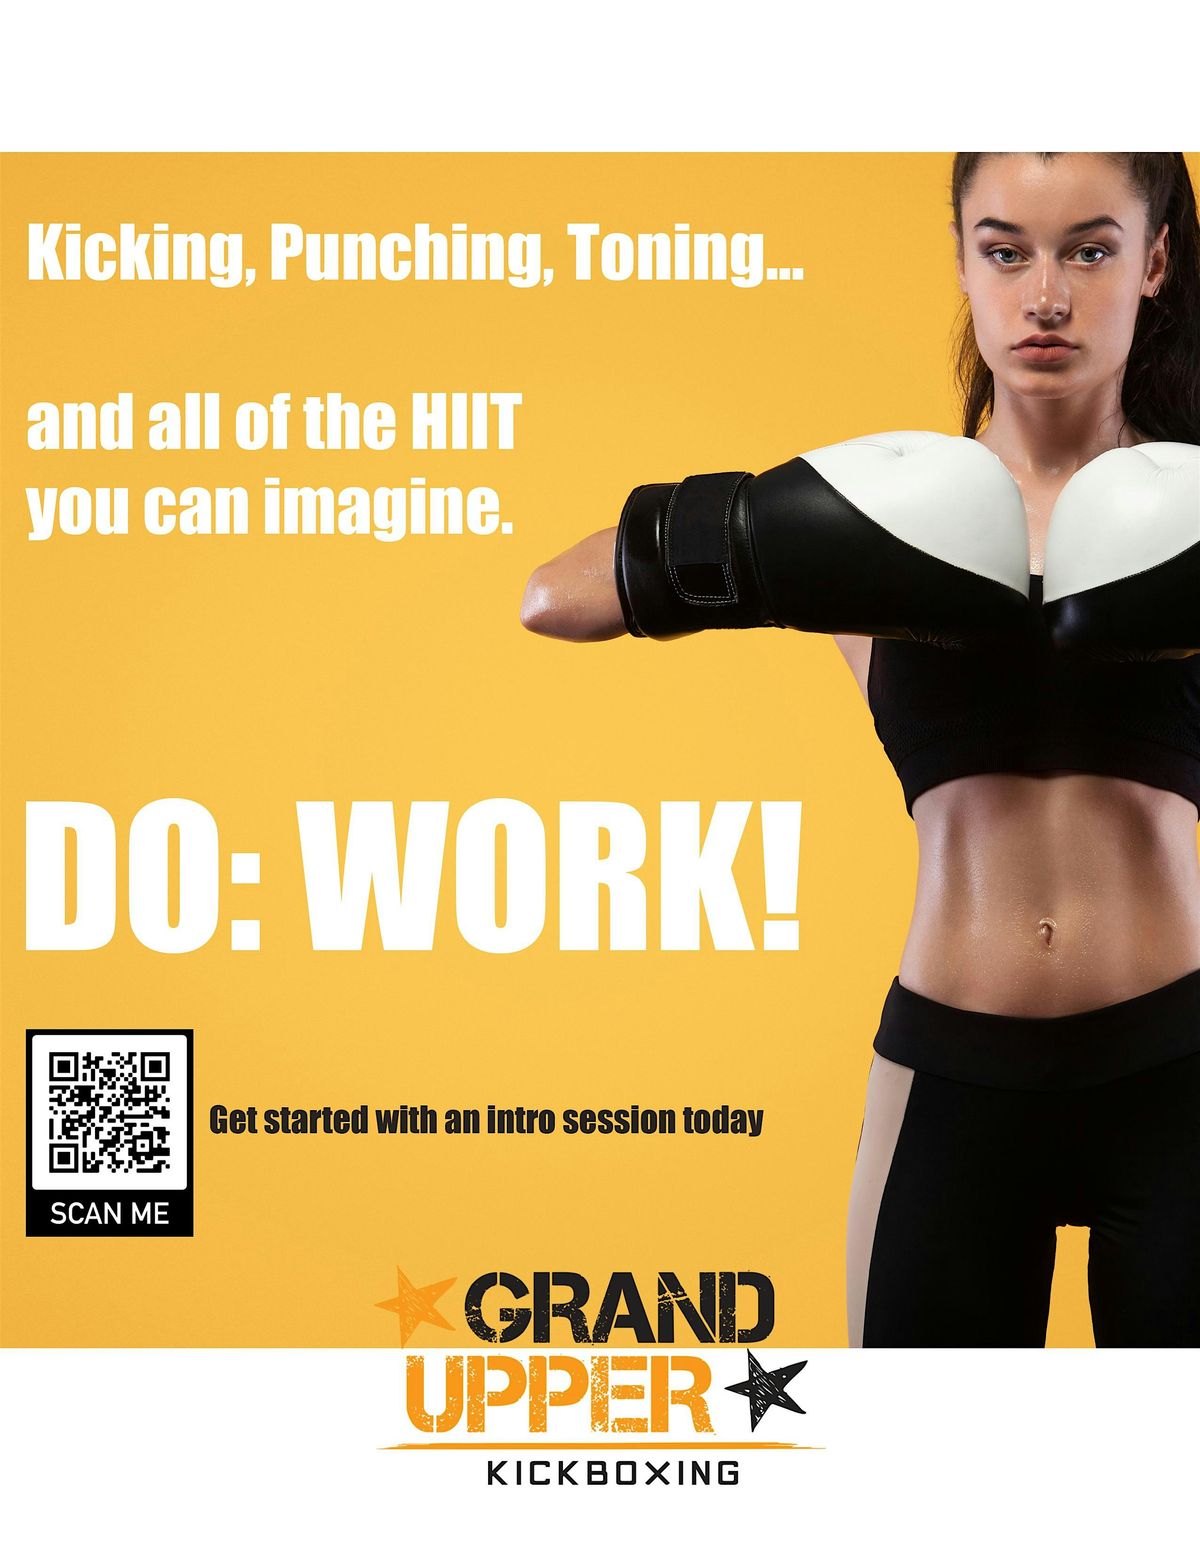 Dance-Boxing: Cardio Kickboxing with a twist!